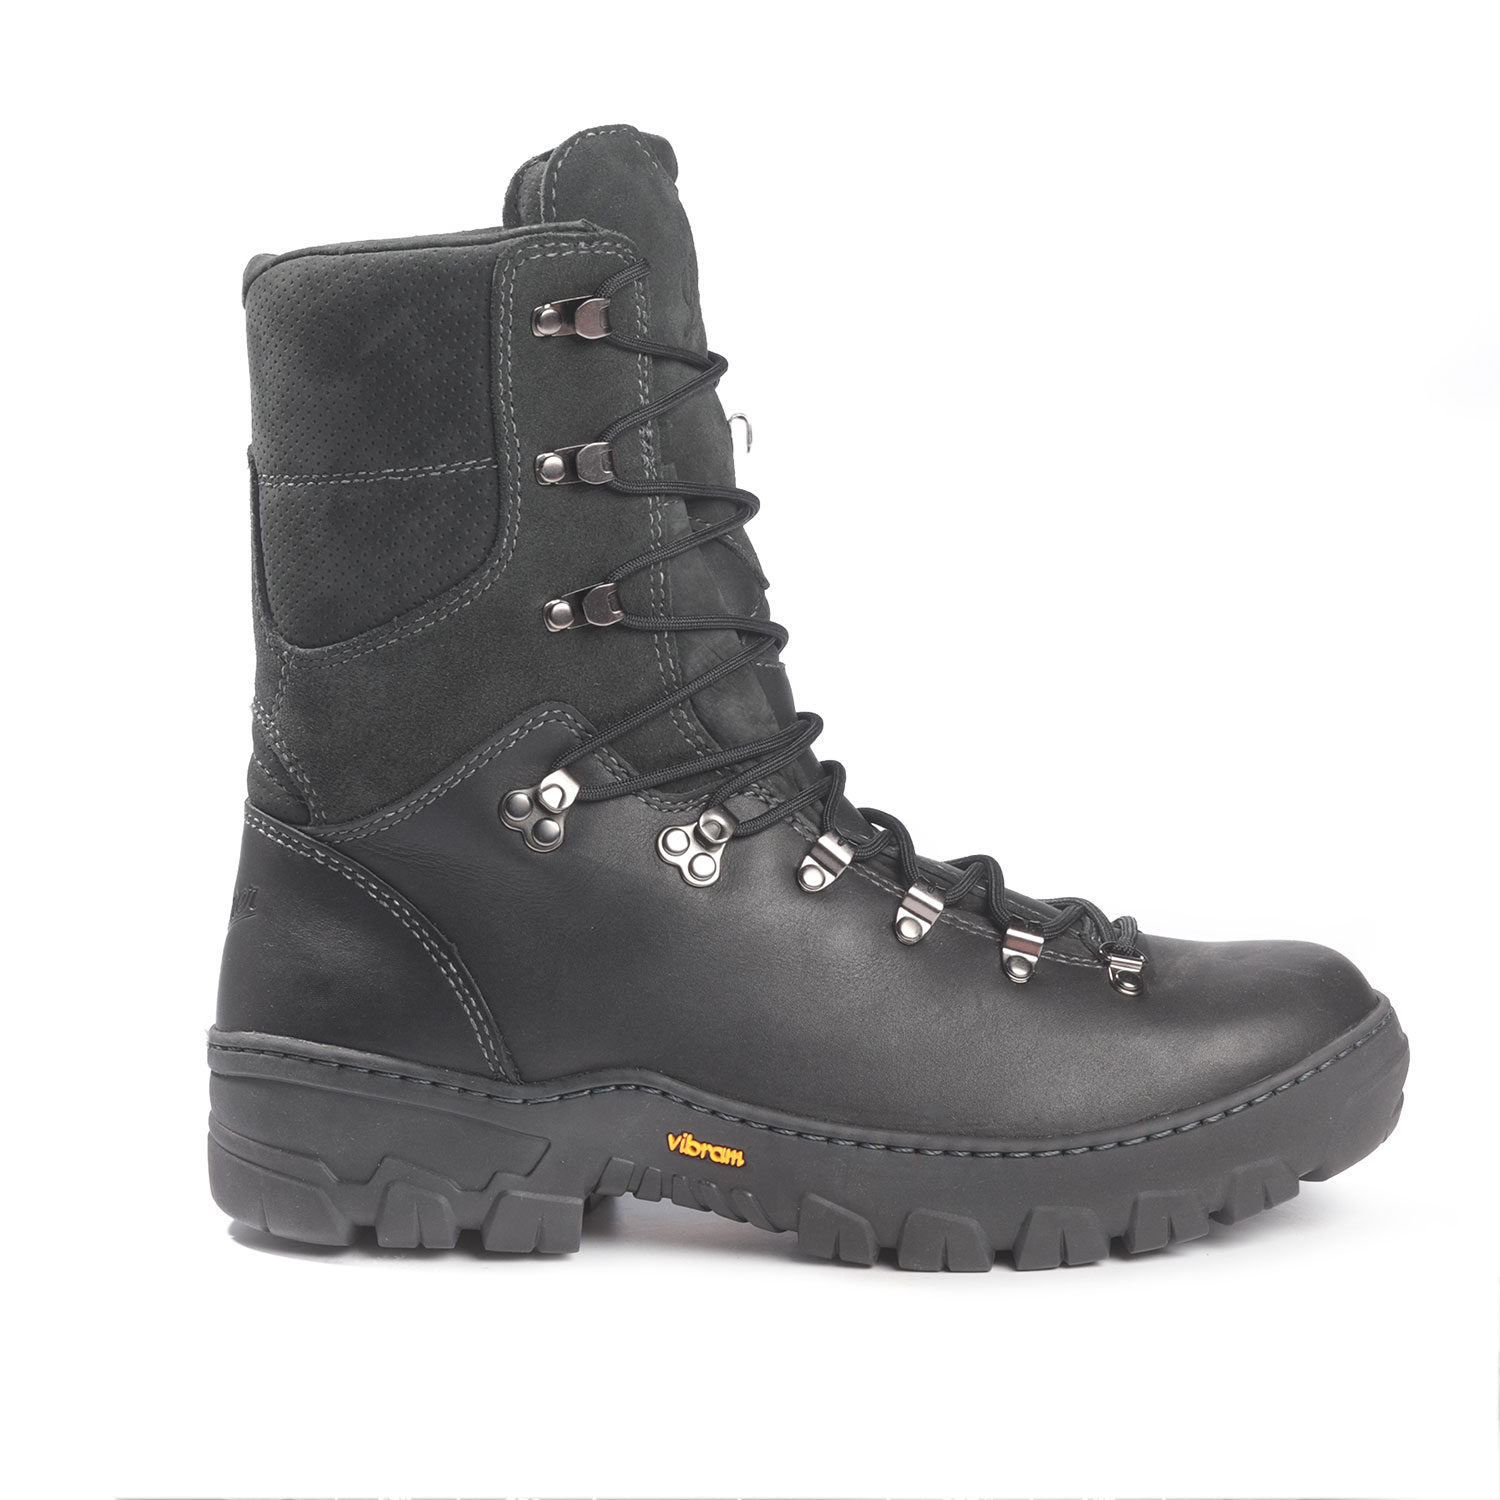 Danner Leather Wildland Tactical Firefighter Boot